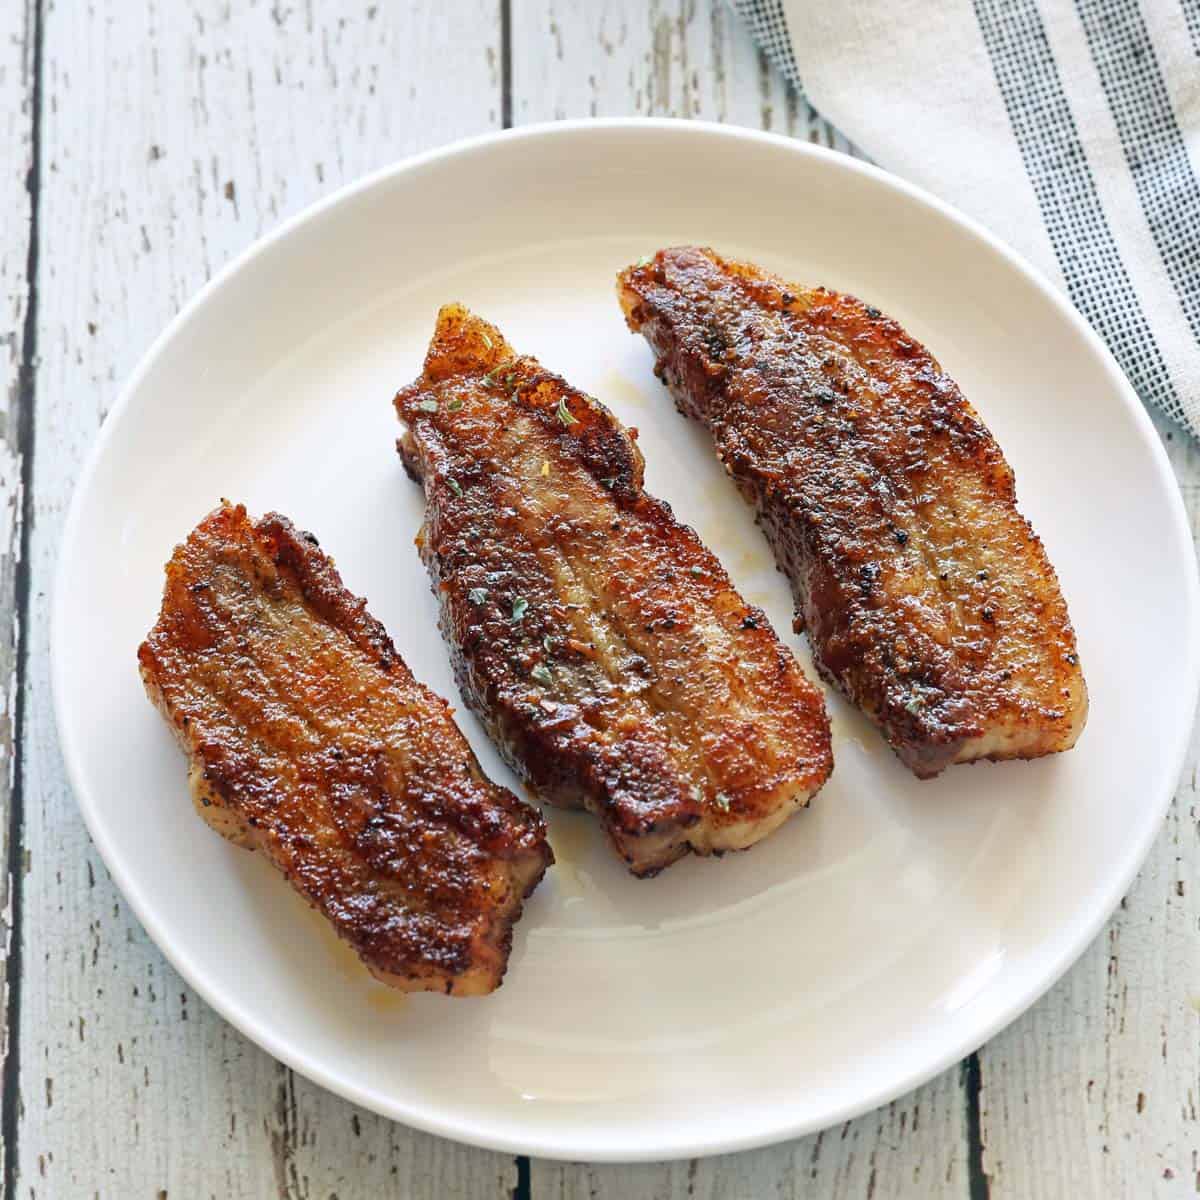 Pork belly strips are served as an appetizer.